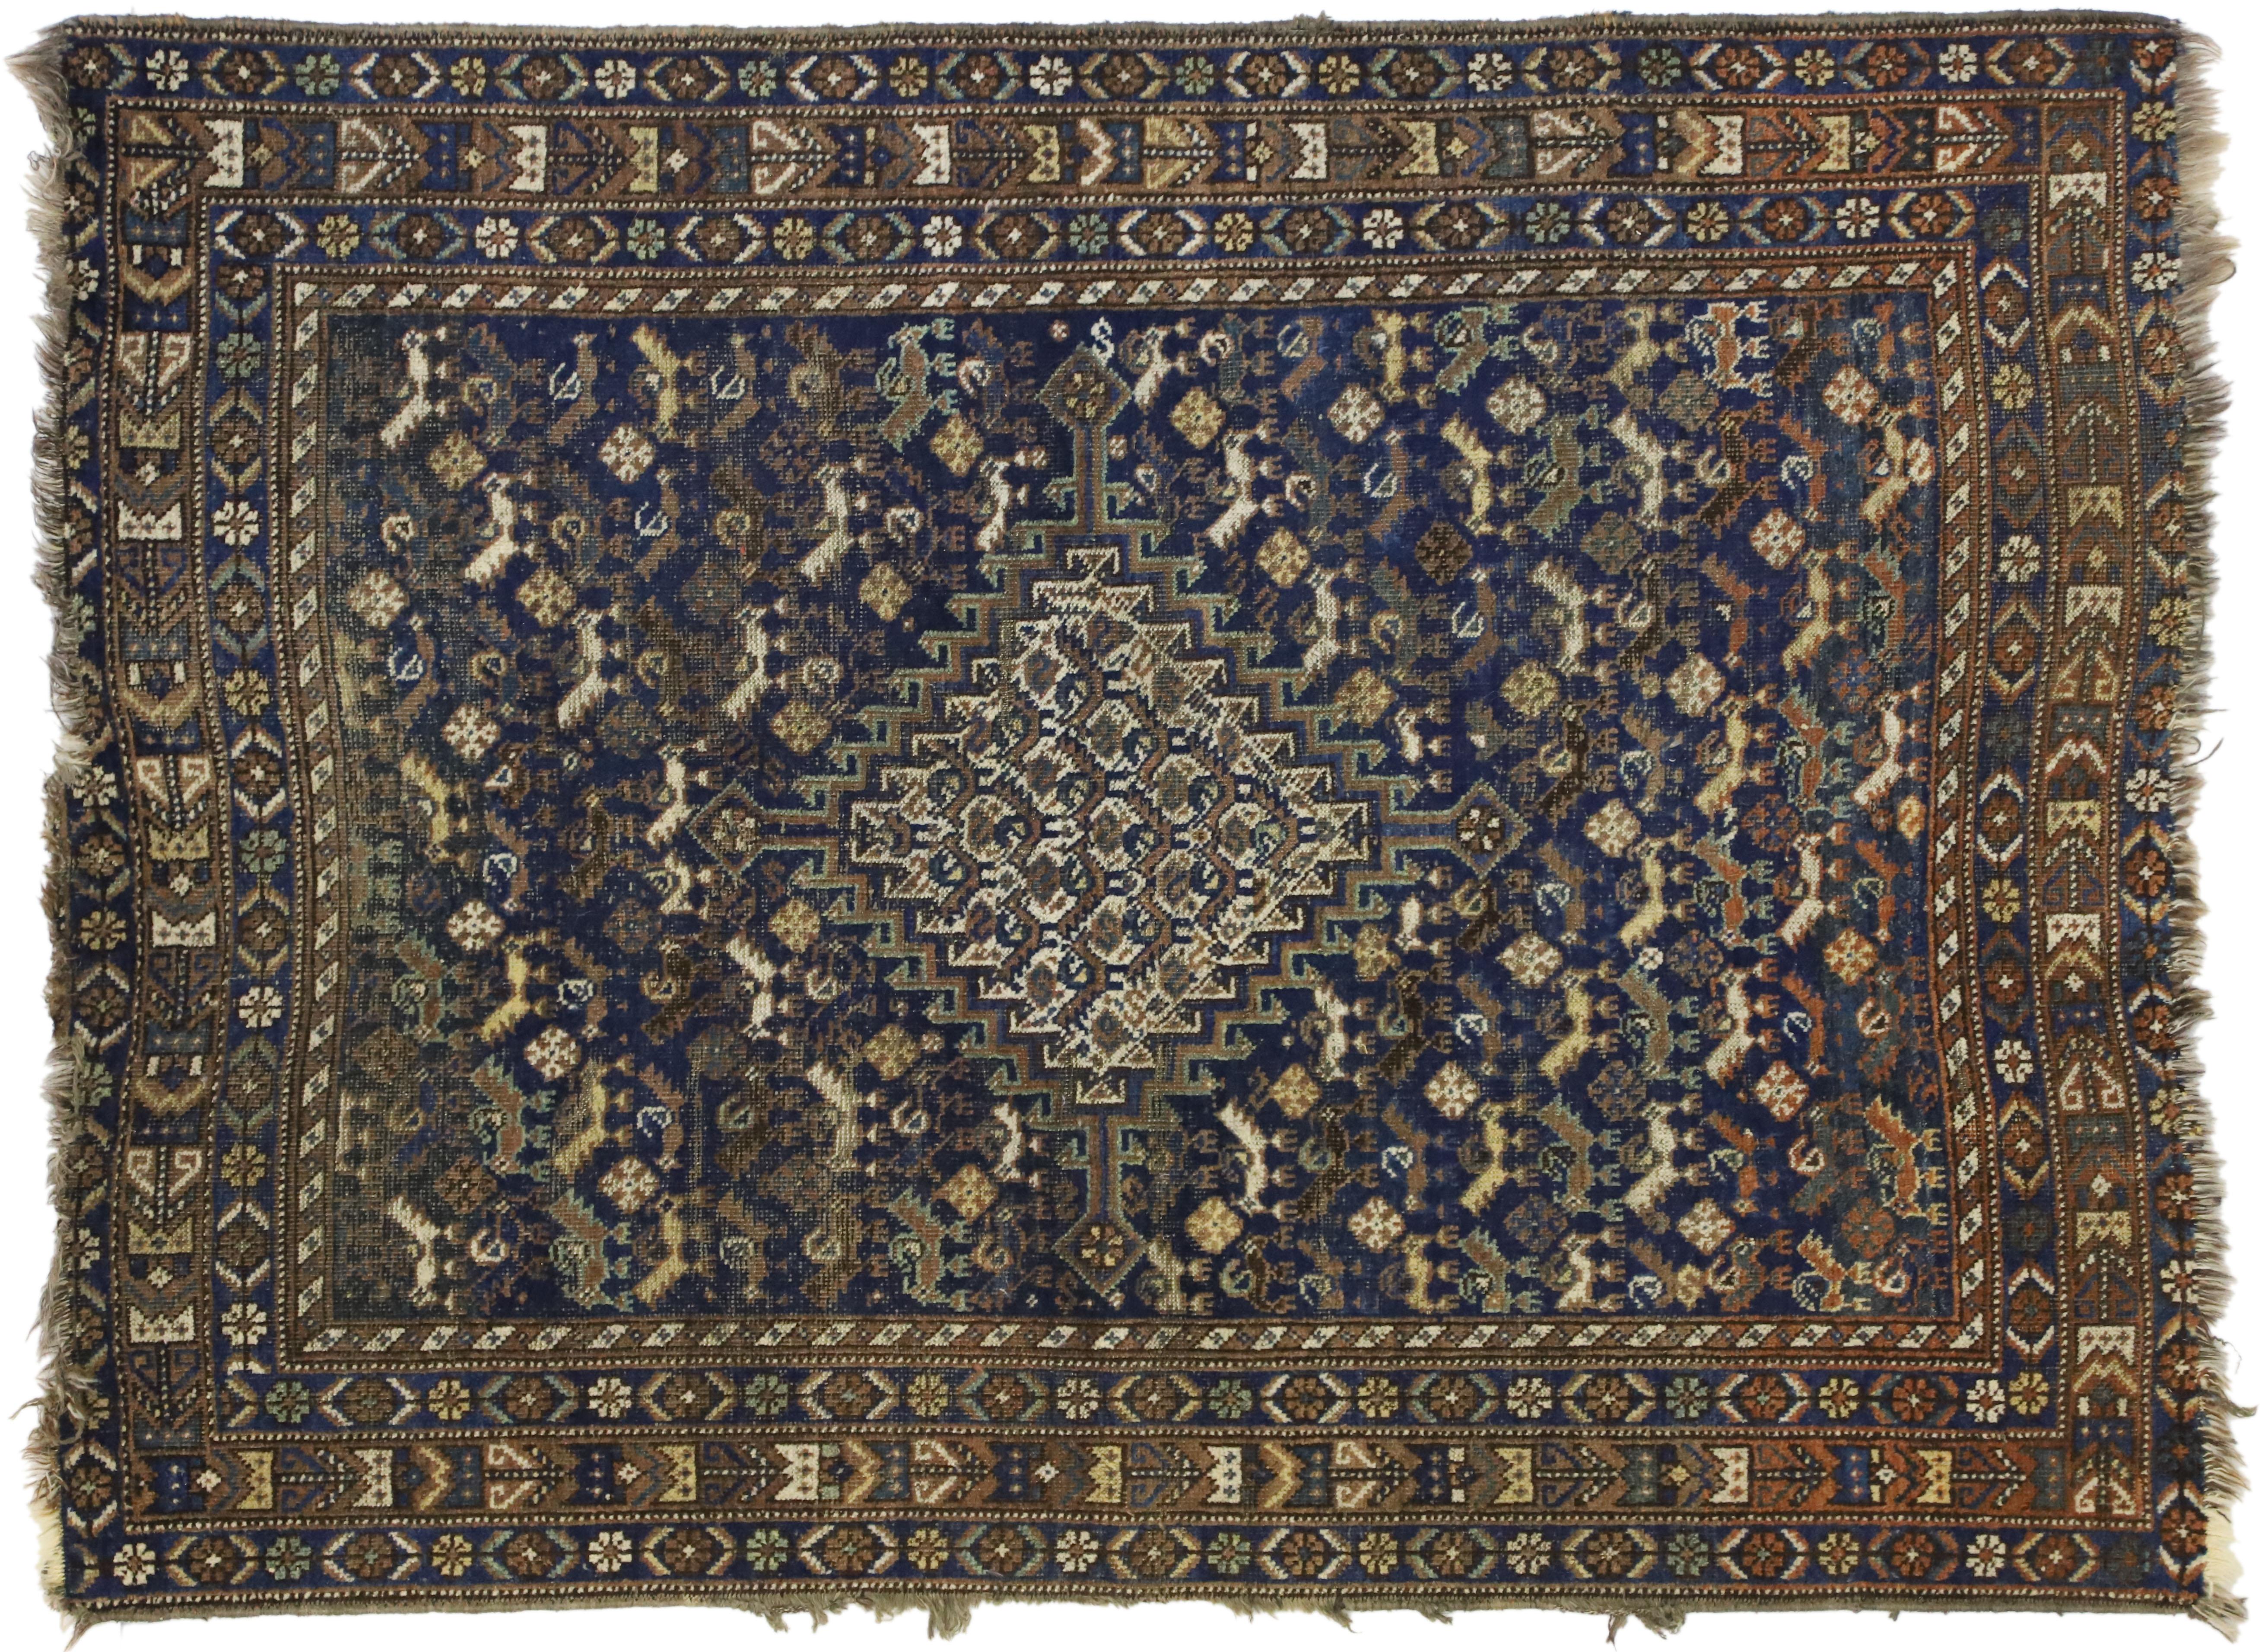 Worn-In Distressed Antique Persian Shiraz Accent Rug with Adirondack Lodge Style For Sale 3